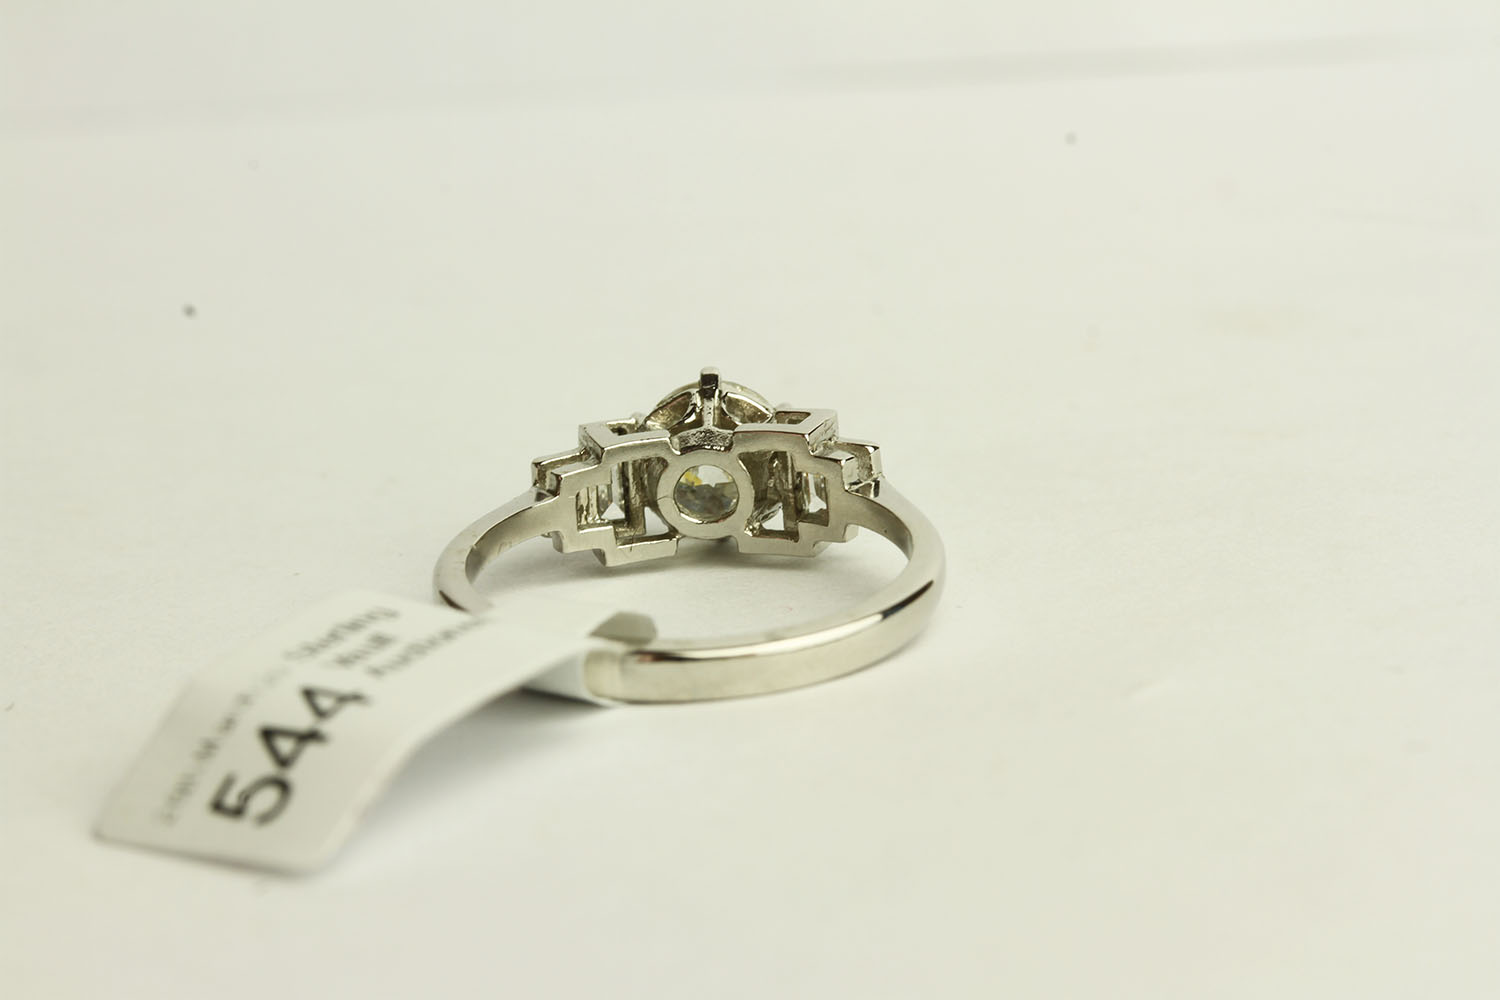 Art Deco Style Diamond Ring, set with 1 old cut diamond approximately 1.02ct, claw set, baguette cut - Image 3 of 3